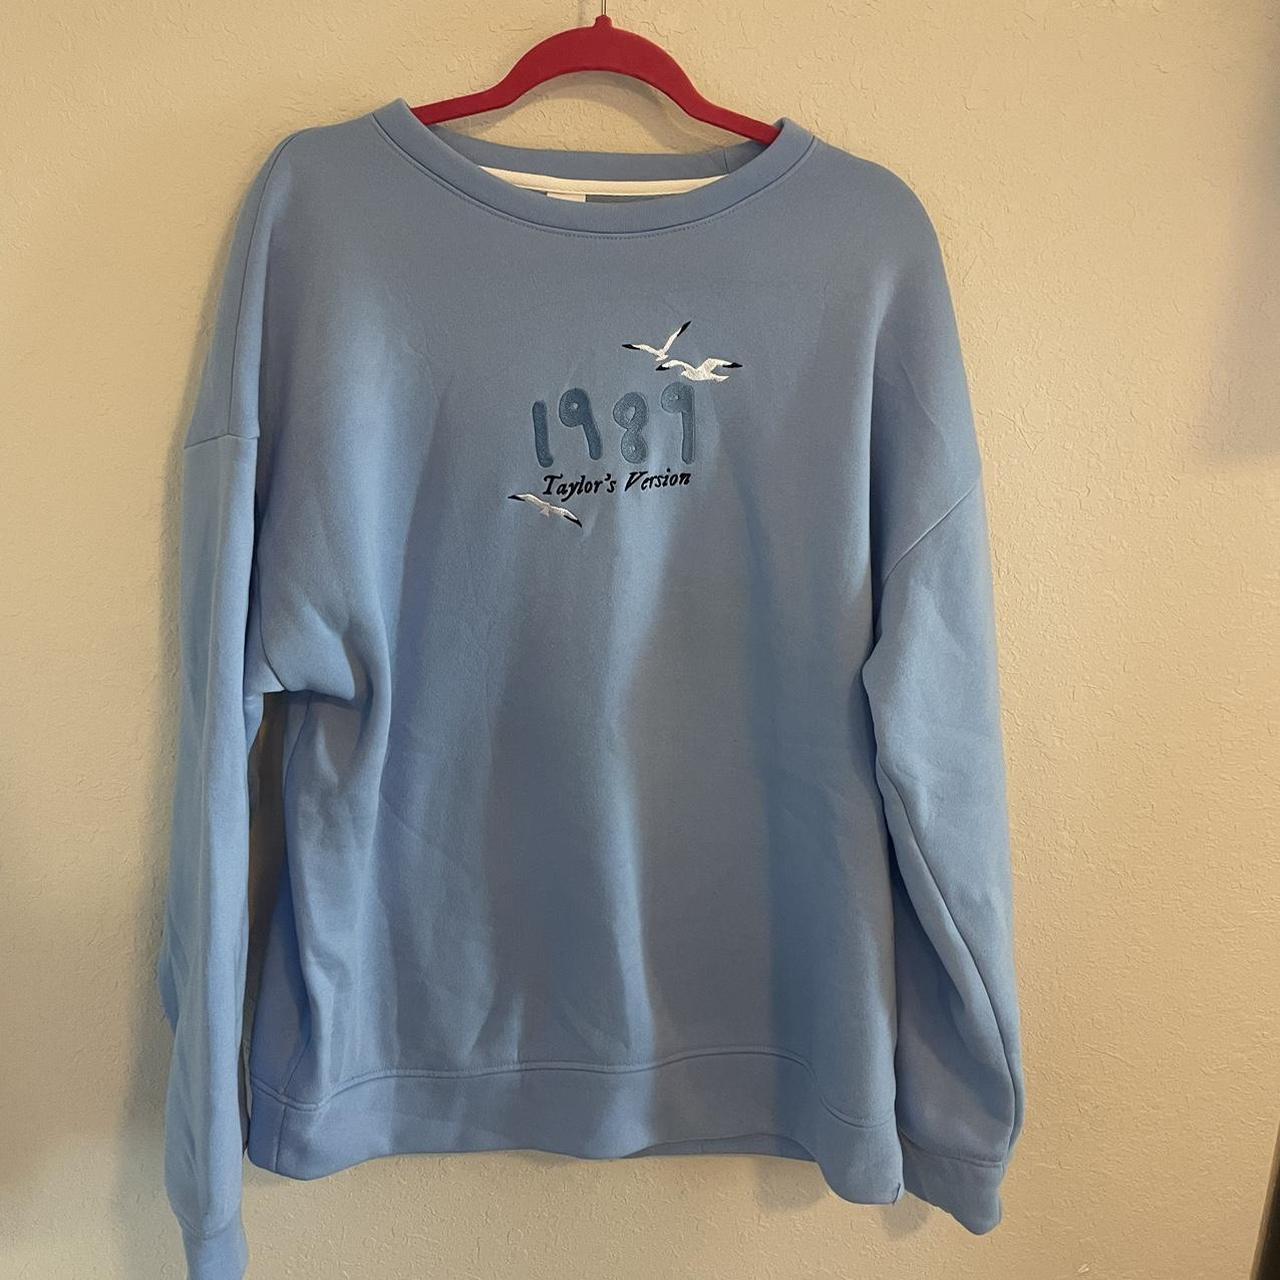 1989 Taylor’s version blue sweatshirt! This would be... - Depop